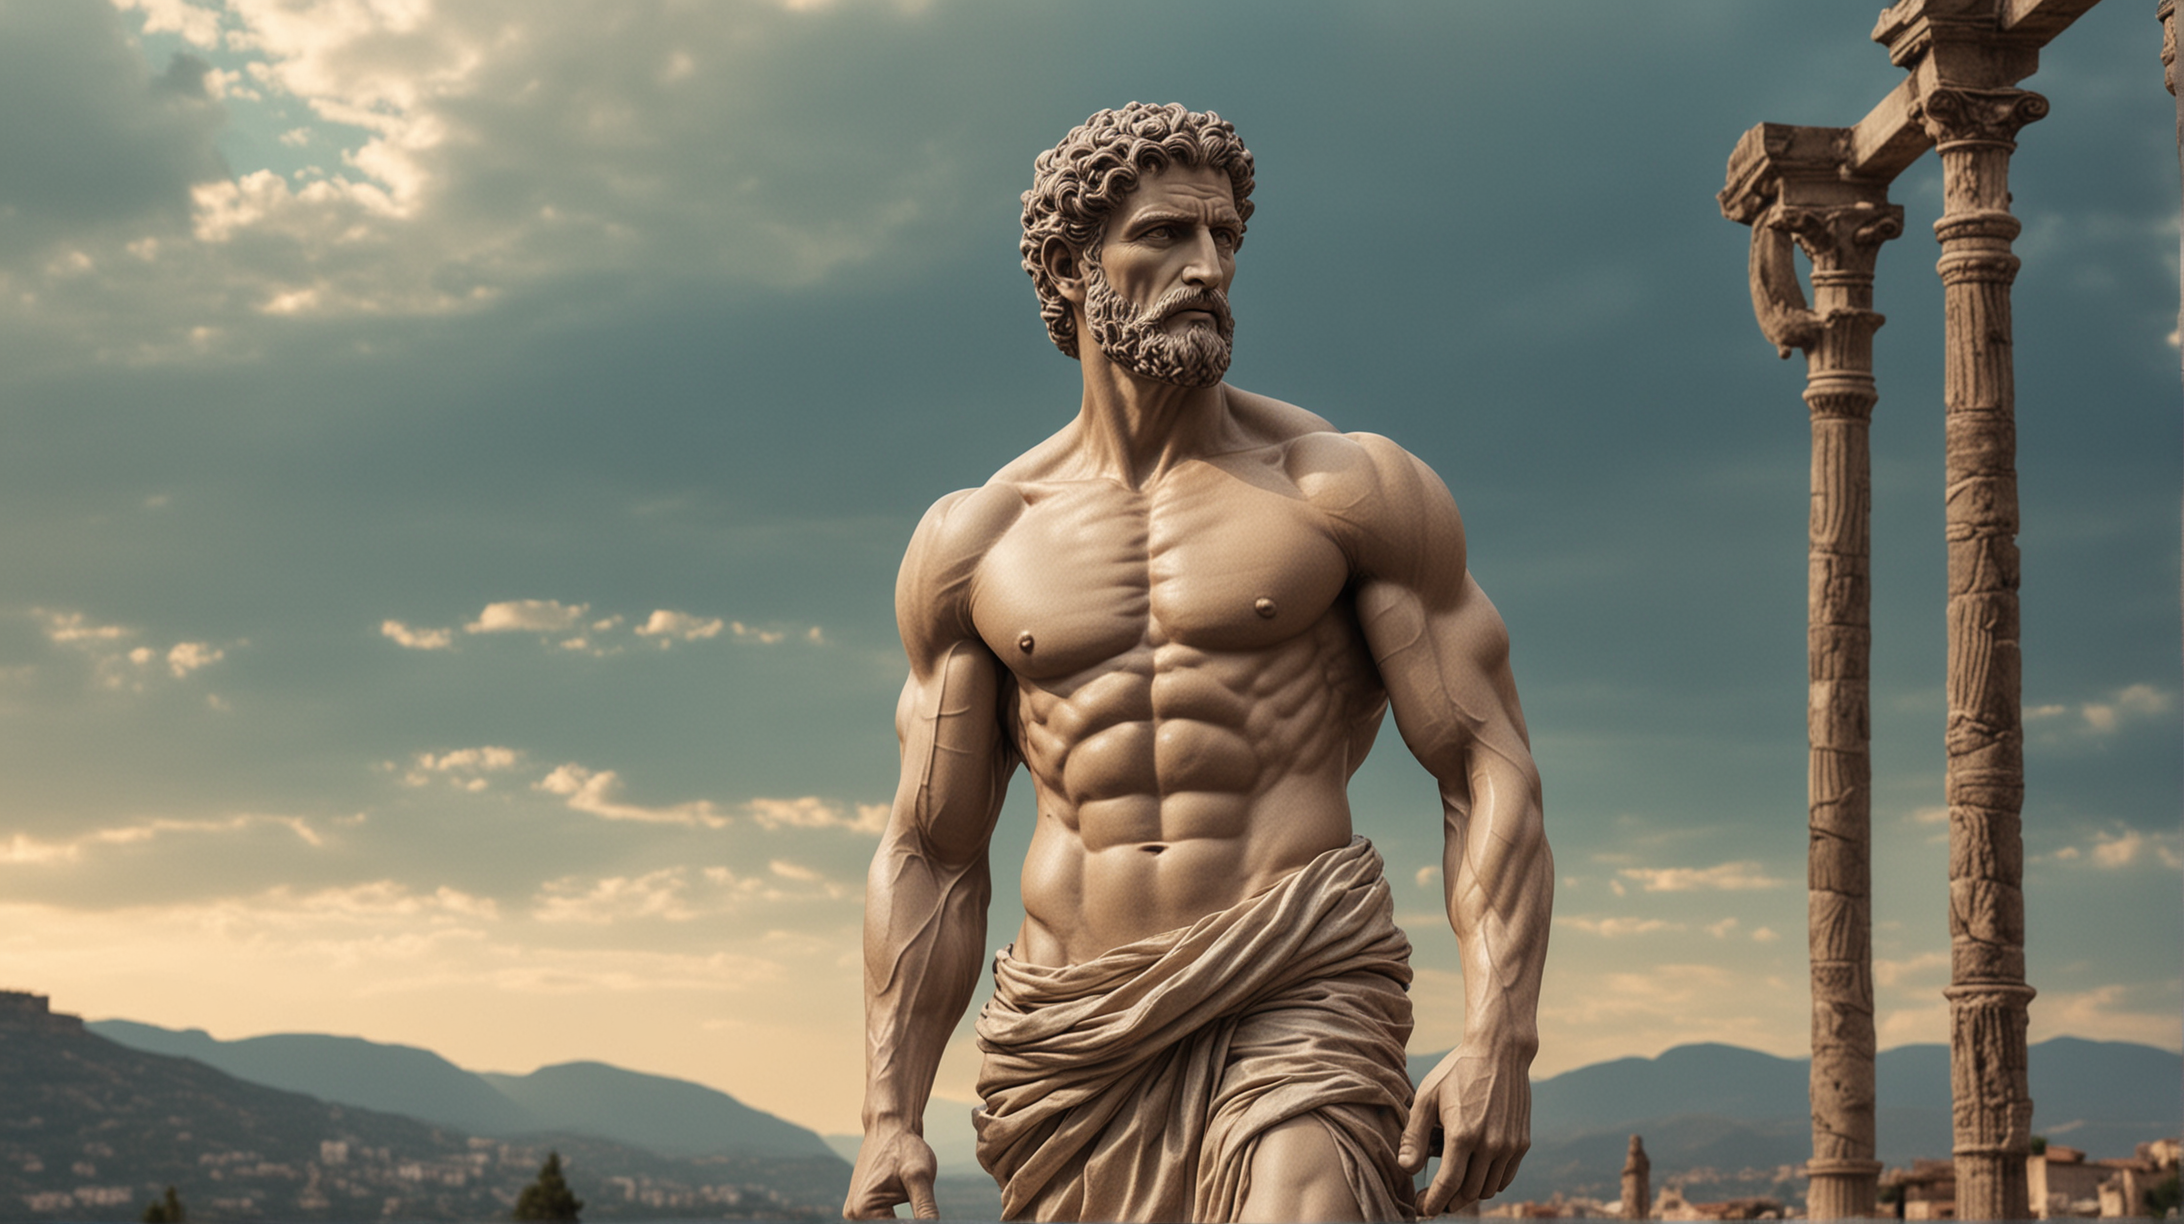 Stoic Ancient Man Statue in Elegant Outdoor Setting